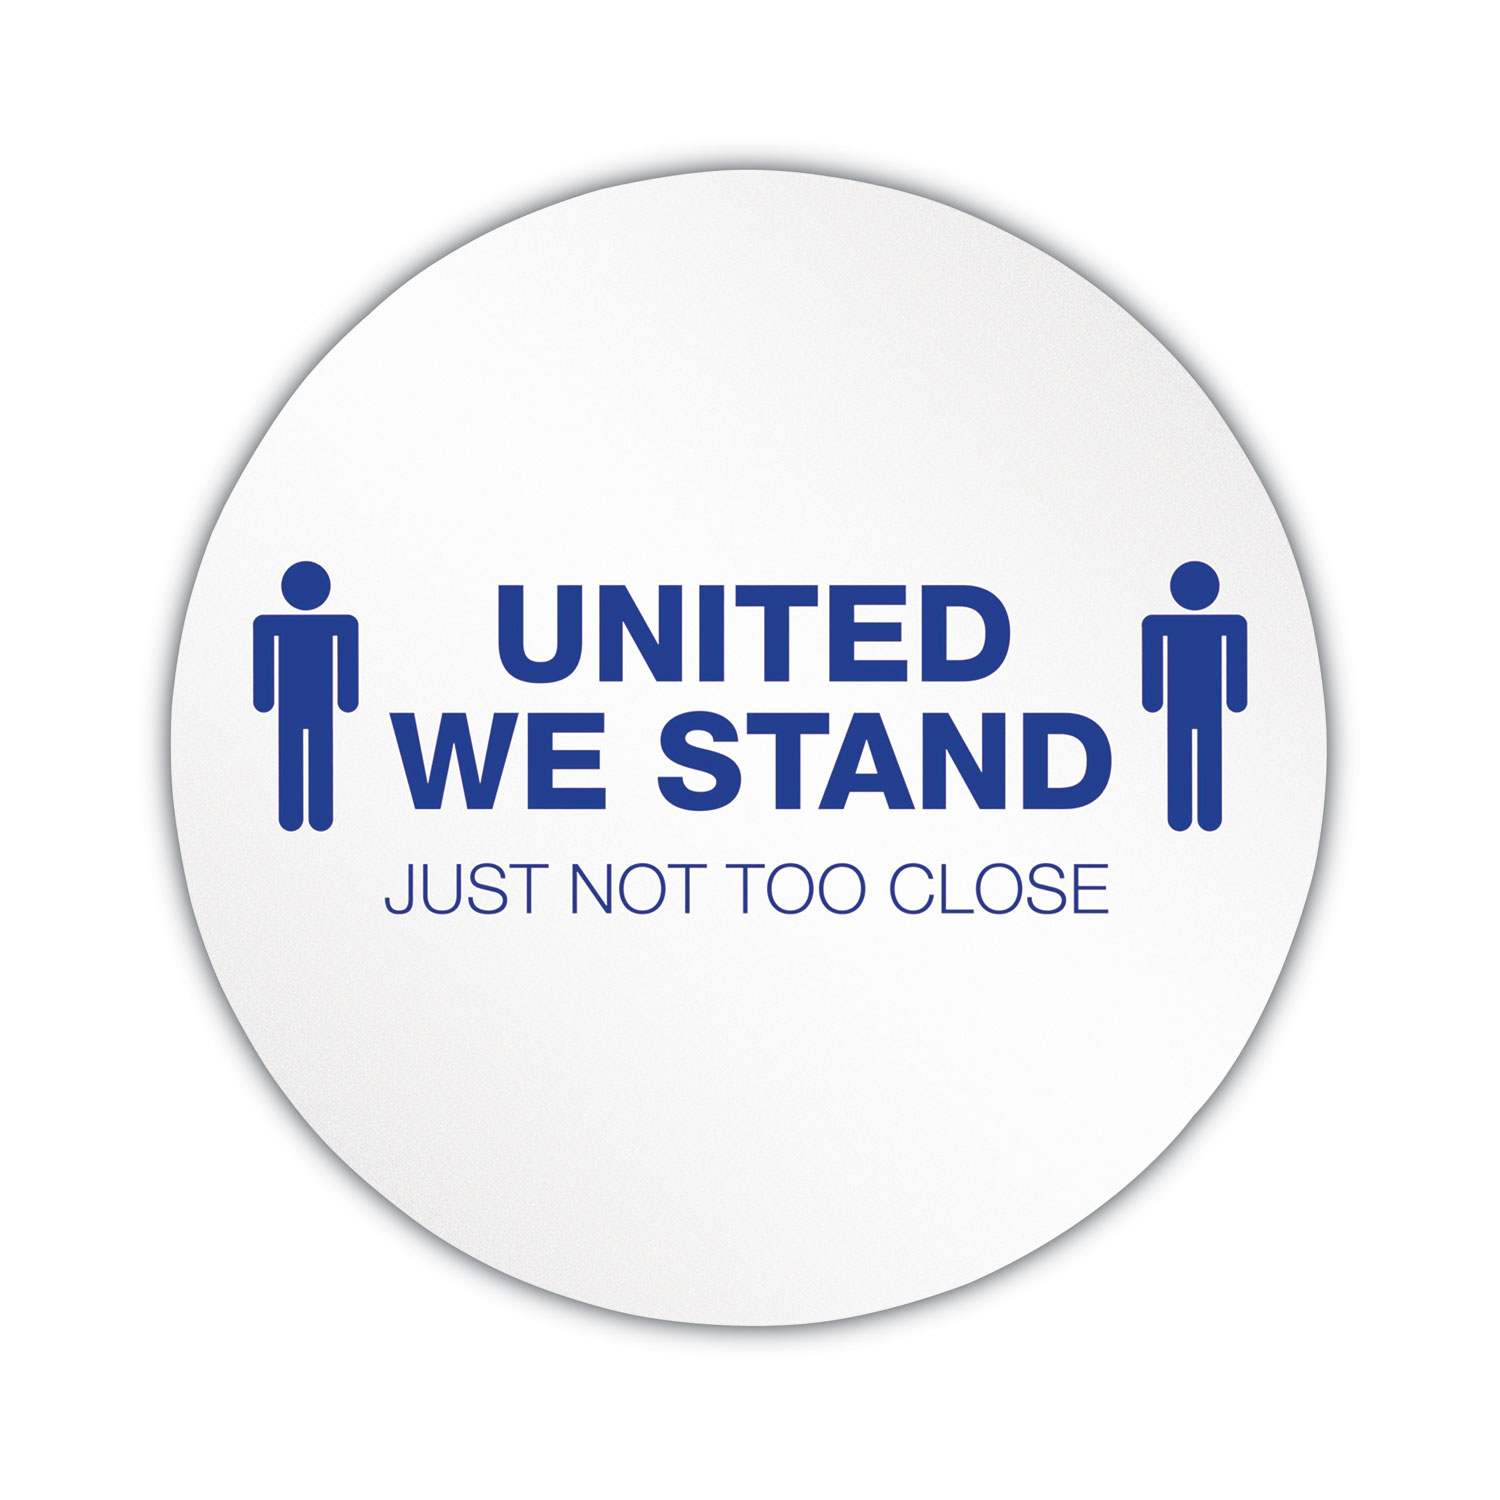 deflecto® Personal Spacing Discs, United We Stand, 20 dia, White/Blue, 6/Pack